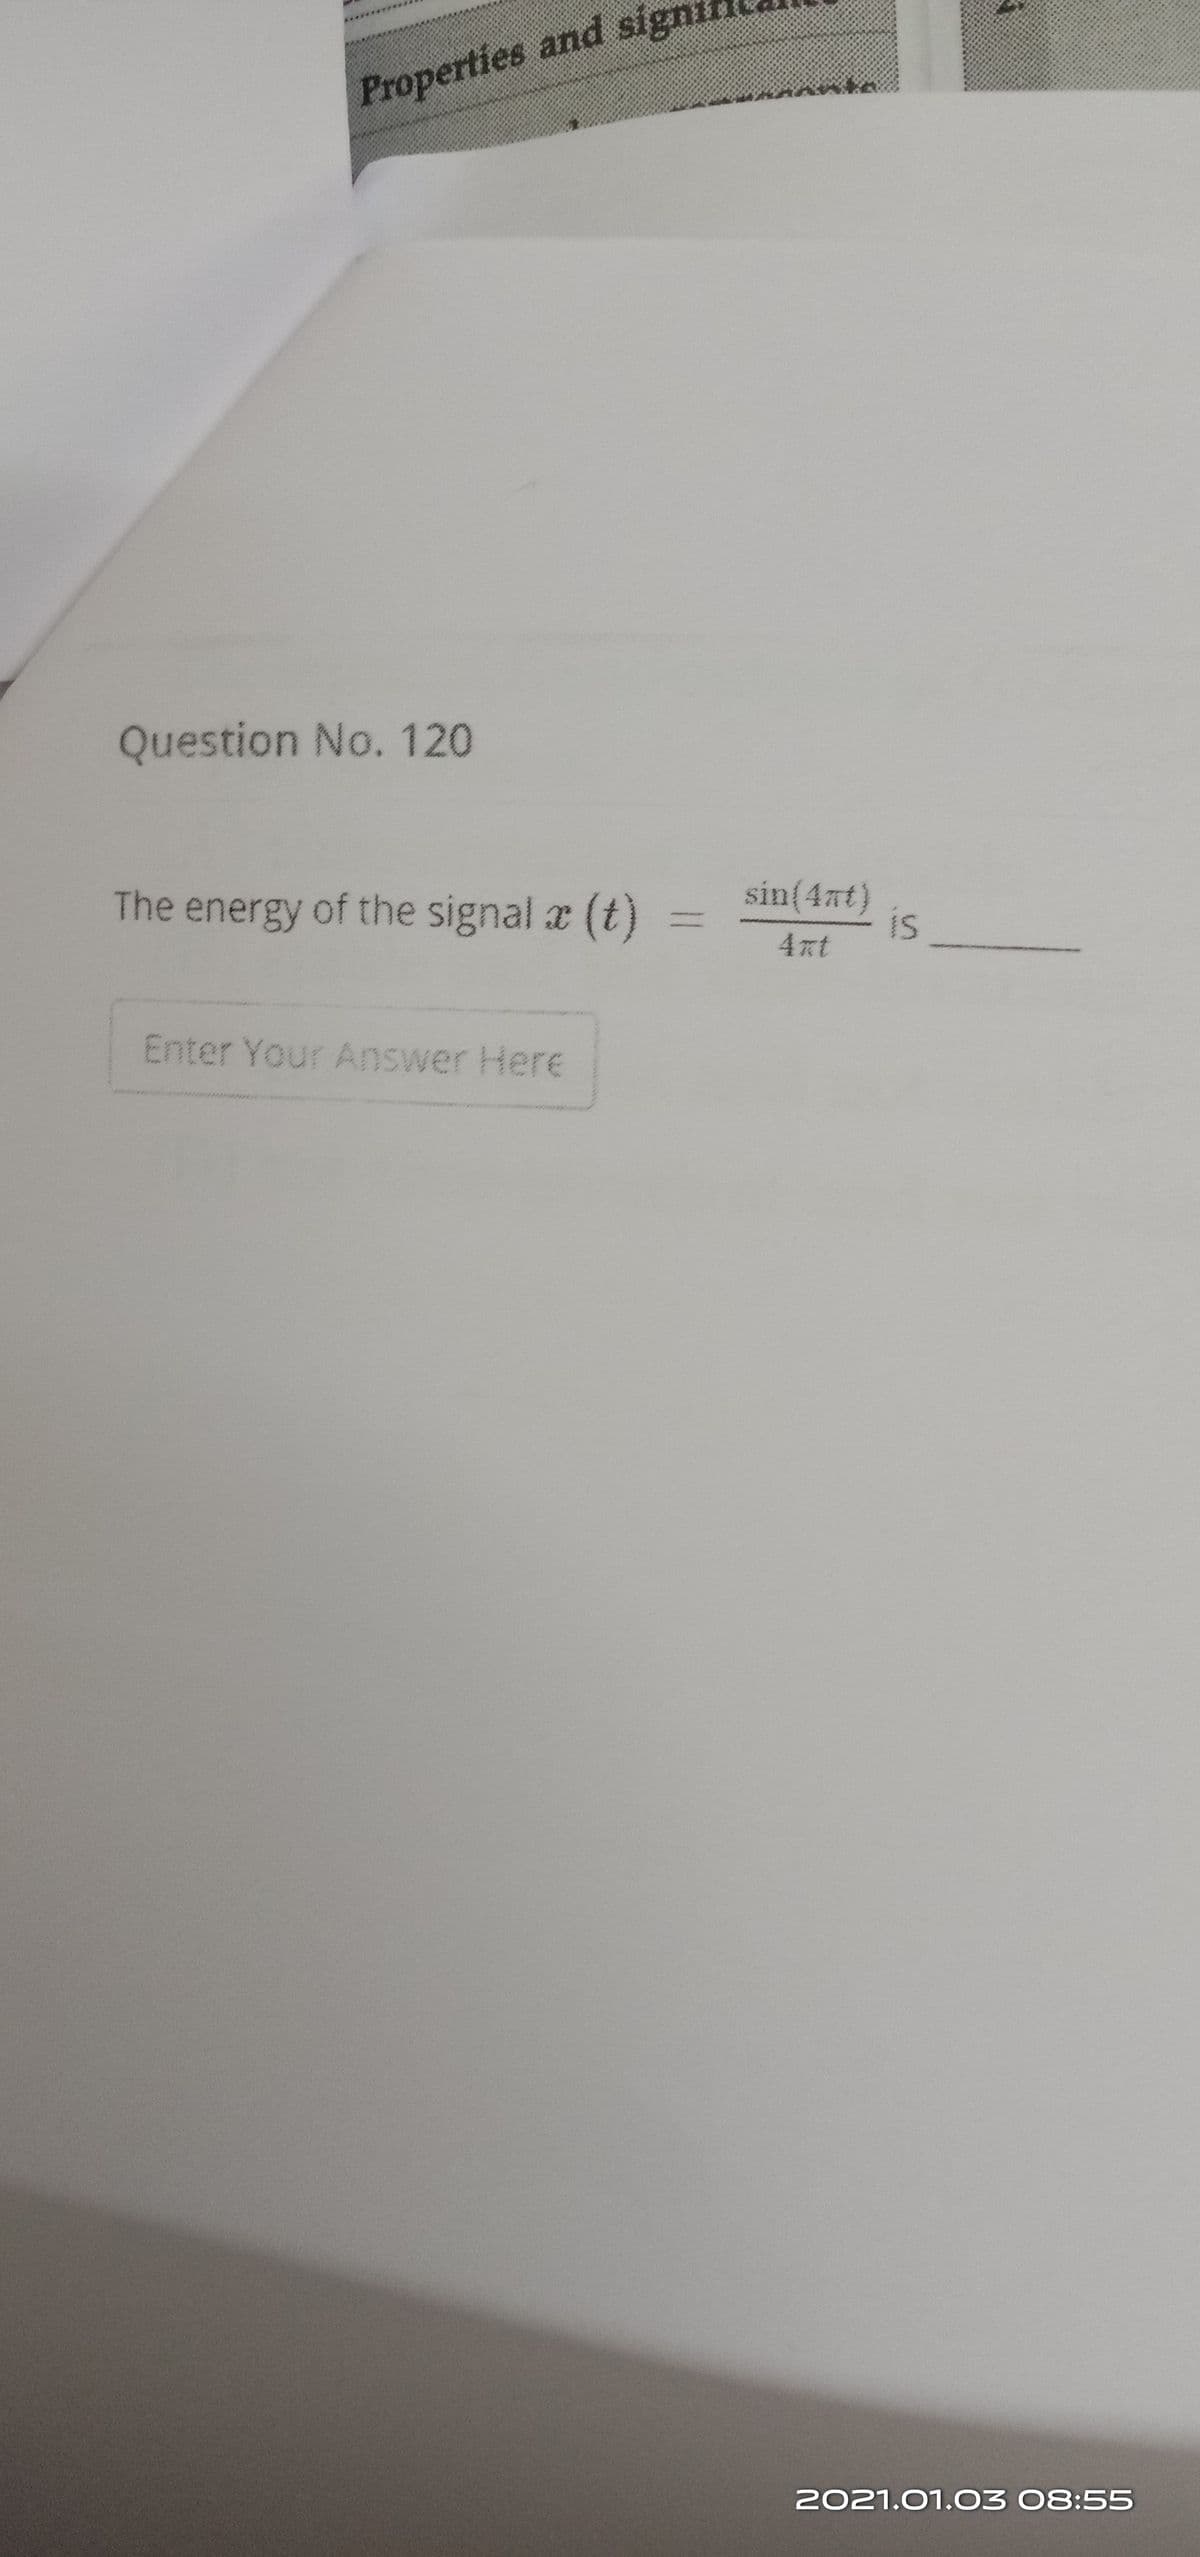 Properties and sin
Question No. 120
The energy of the signal a (t)
sin(4nt)
is
4xt
Enter Your Answer Here
2021.01.03 08:55
